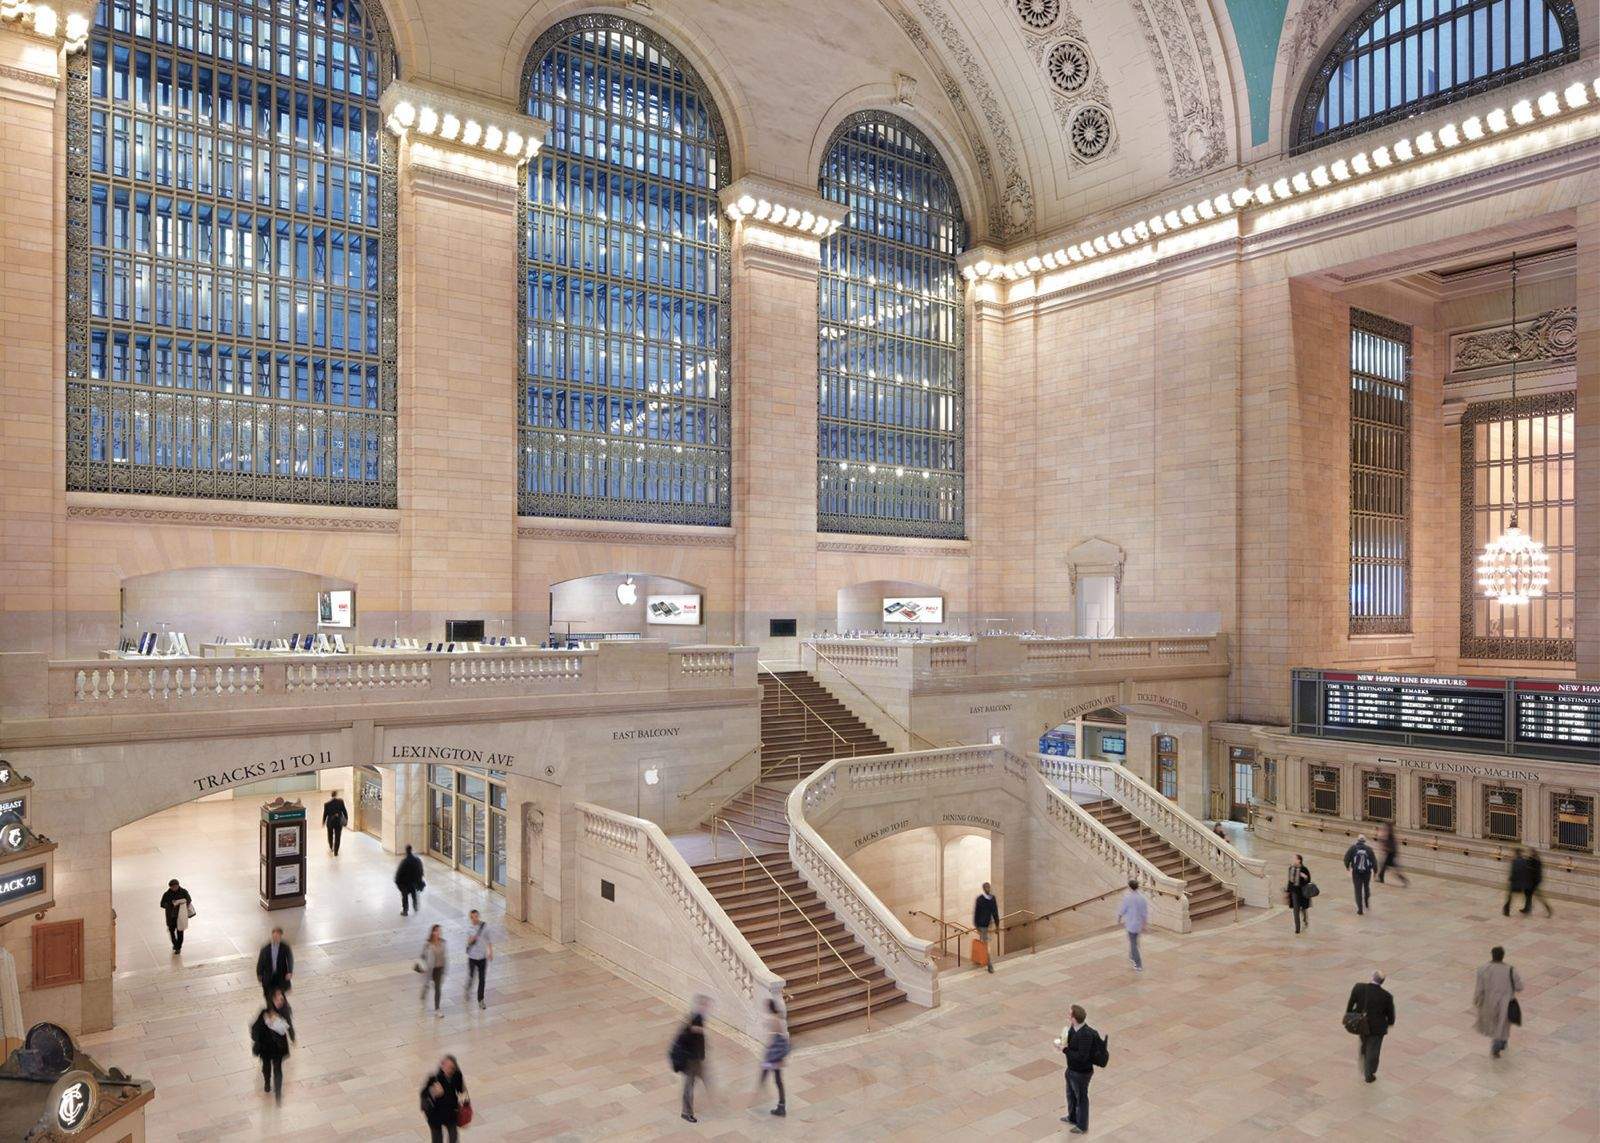 Apple Grand Central is one of the company's most stunning retail outlets.